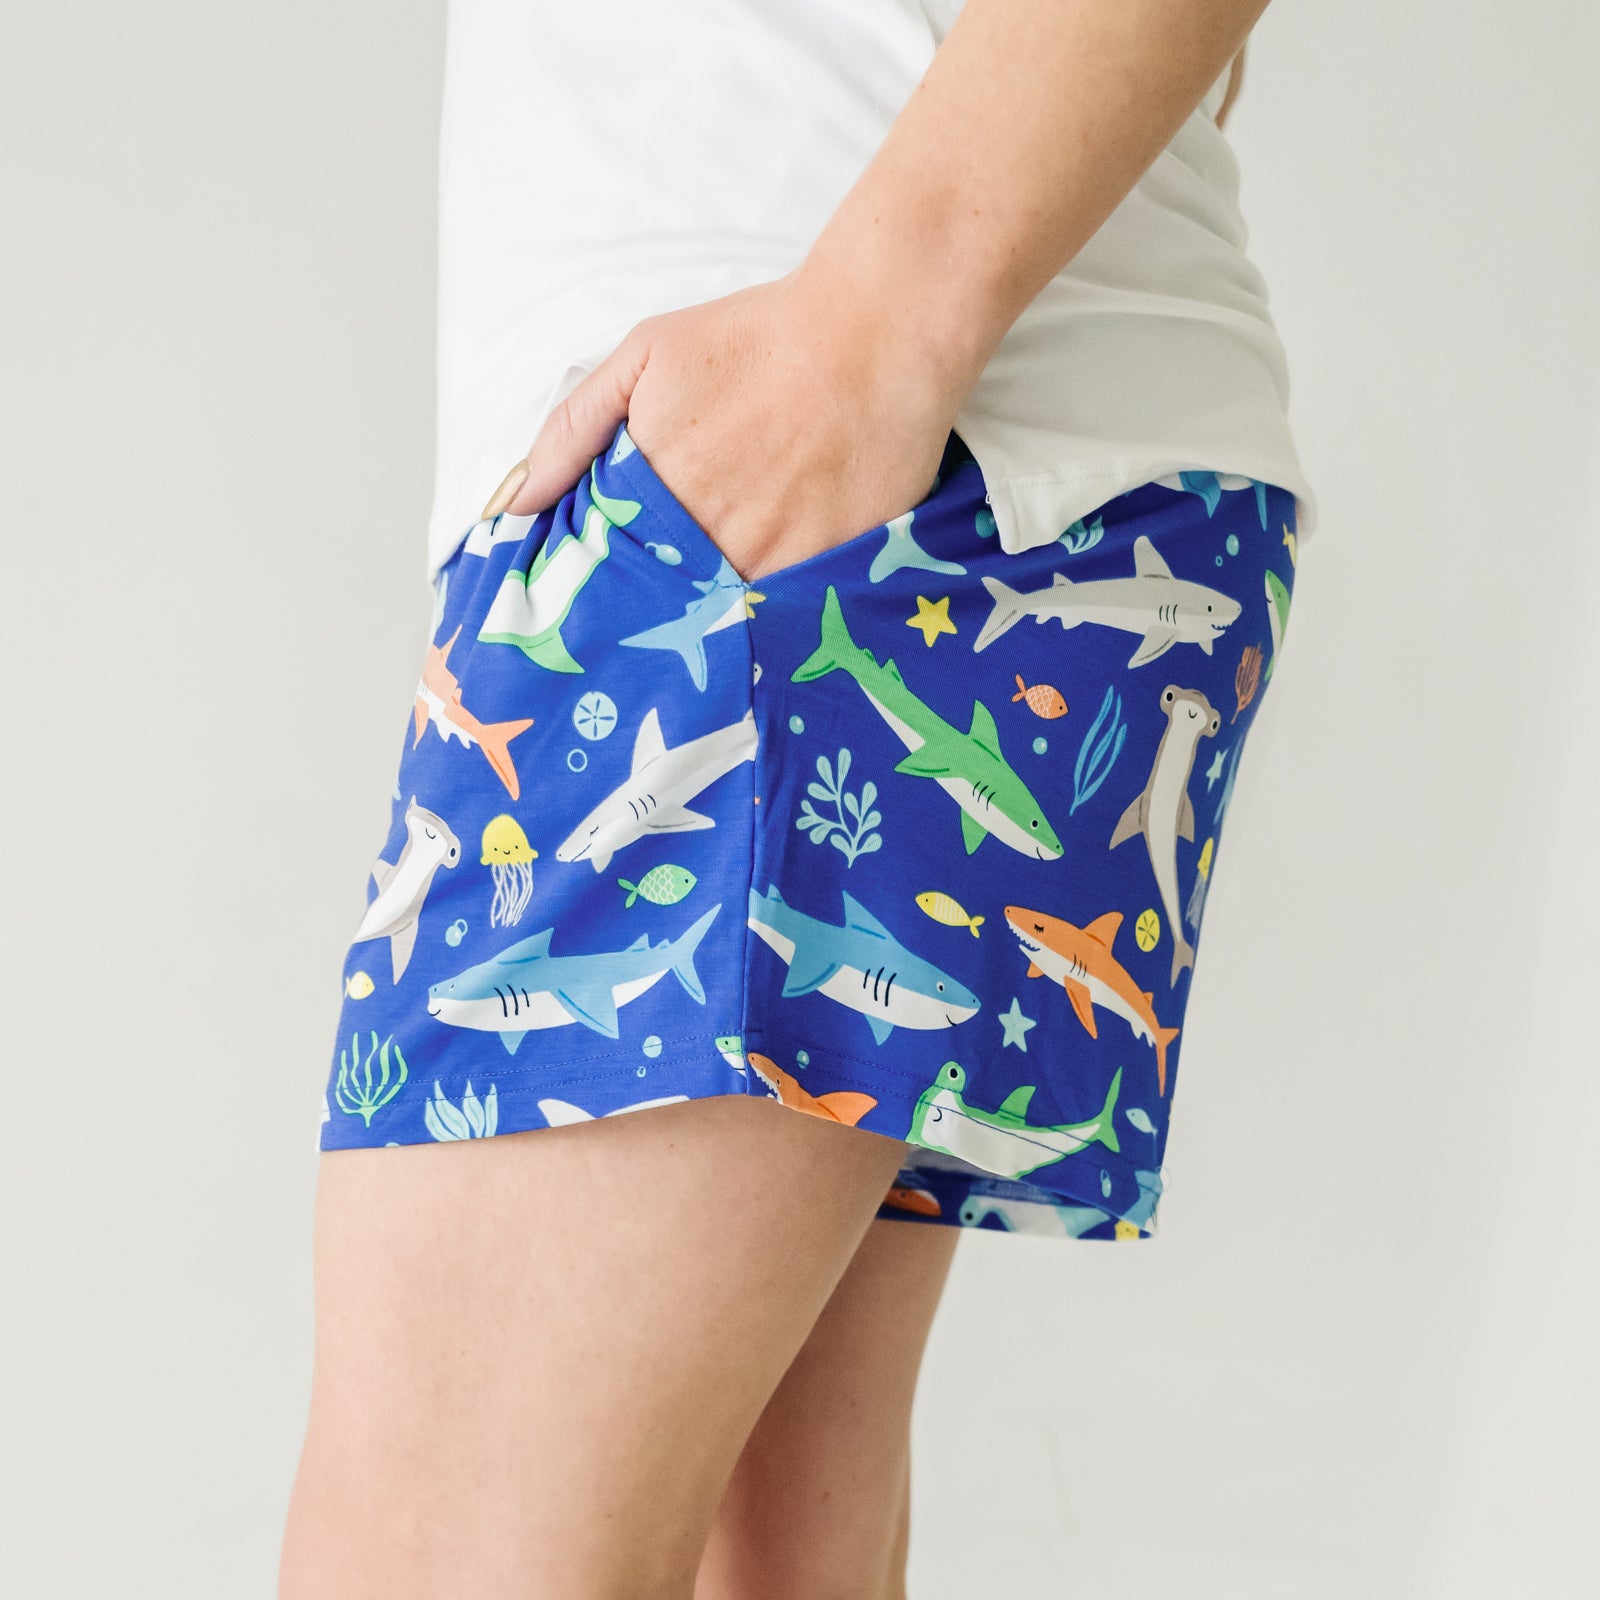 Close up side view image of a woman wearing Rad Reef women's pajama shorts and coordinating top